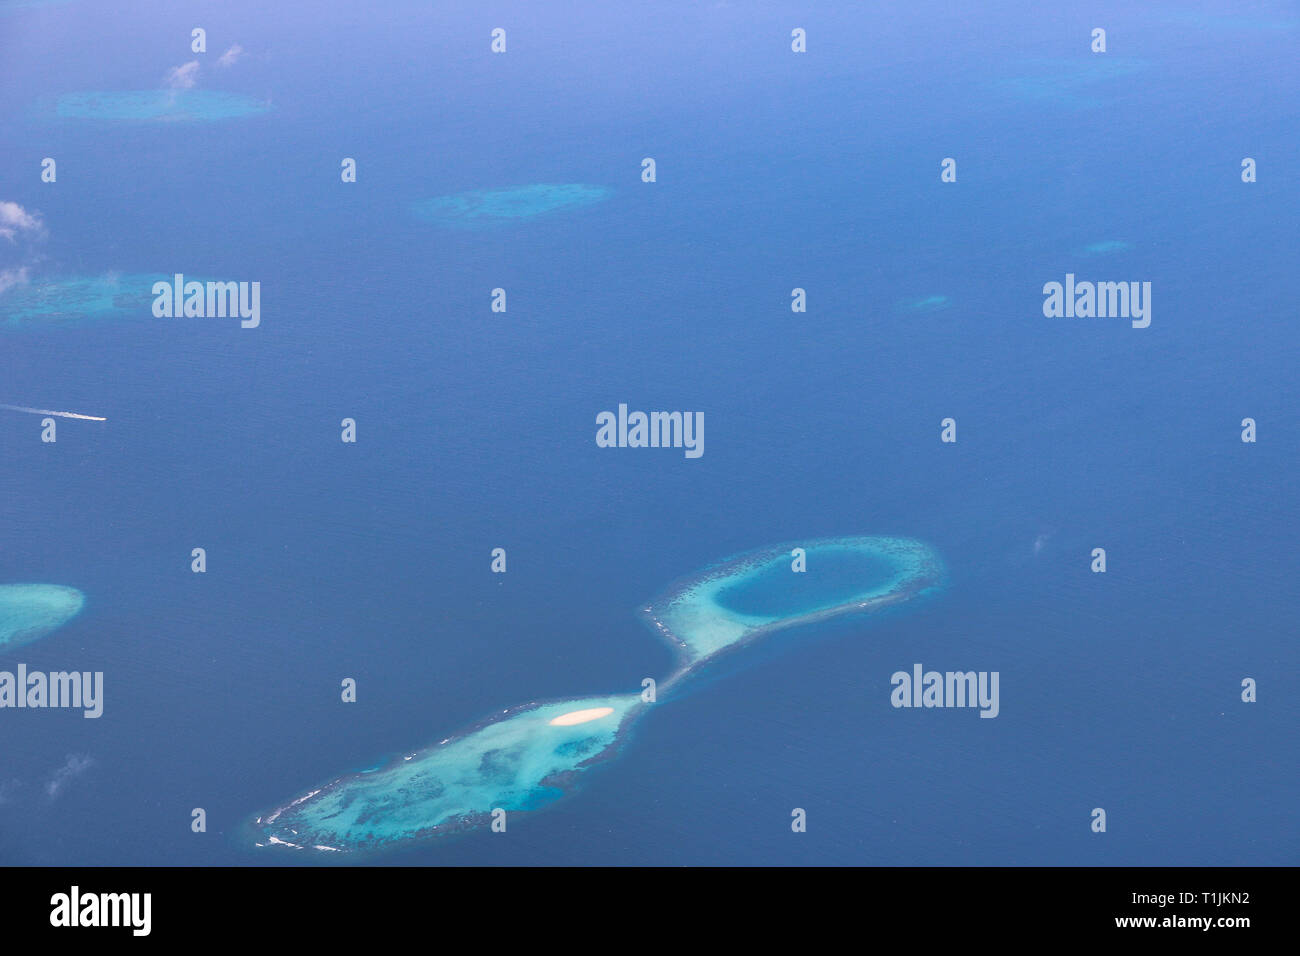 This unique image shows the Maldives photographed from a plane from above. You can see the atolls in the sea well. Stock Photo